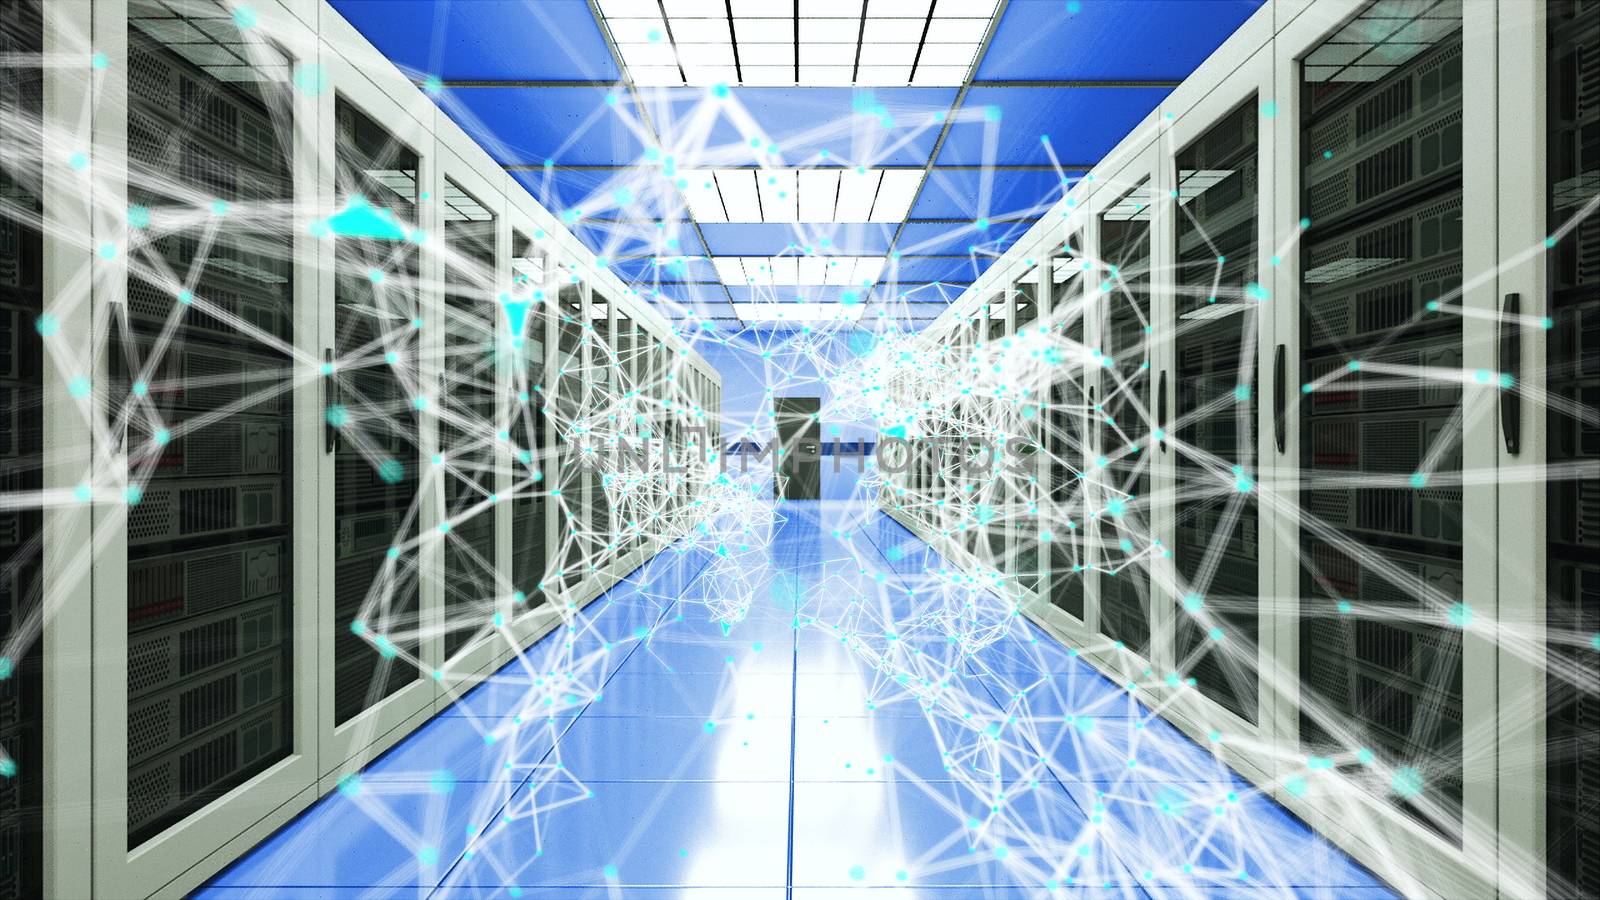 Server room and connection dots in datacenter, web network and internet telecommunication technology, data storage and cloud service concept, 3d rendering